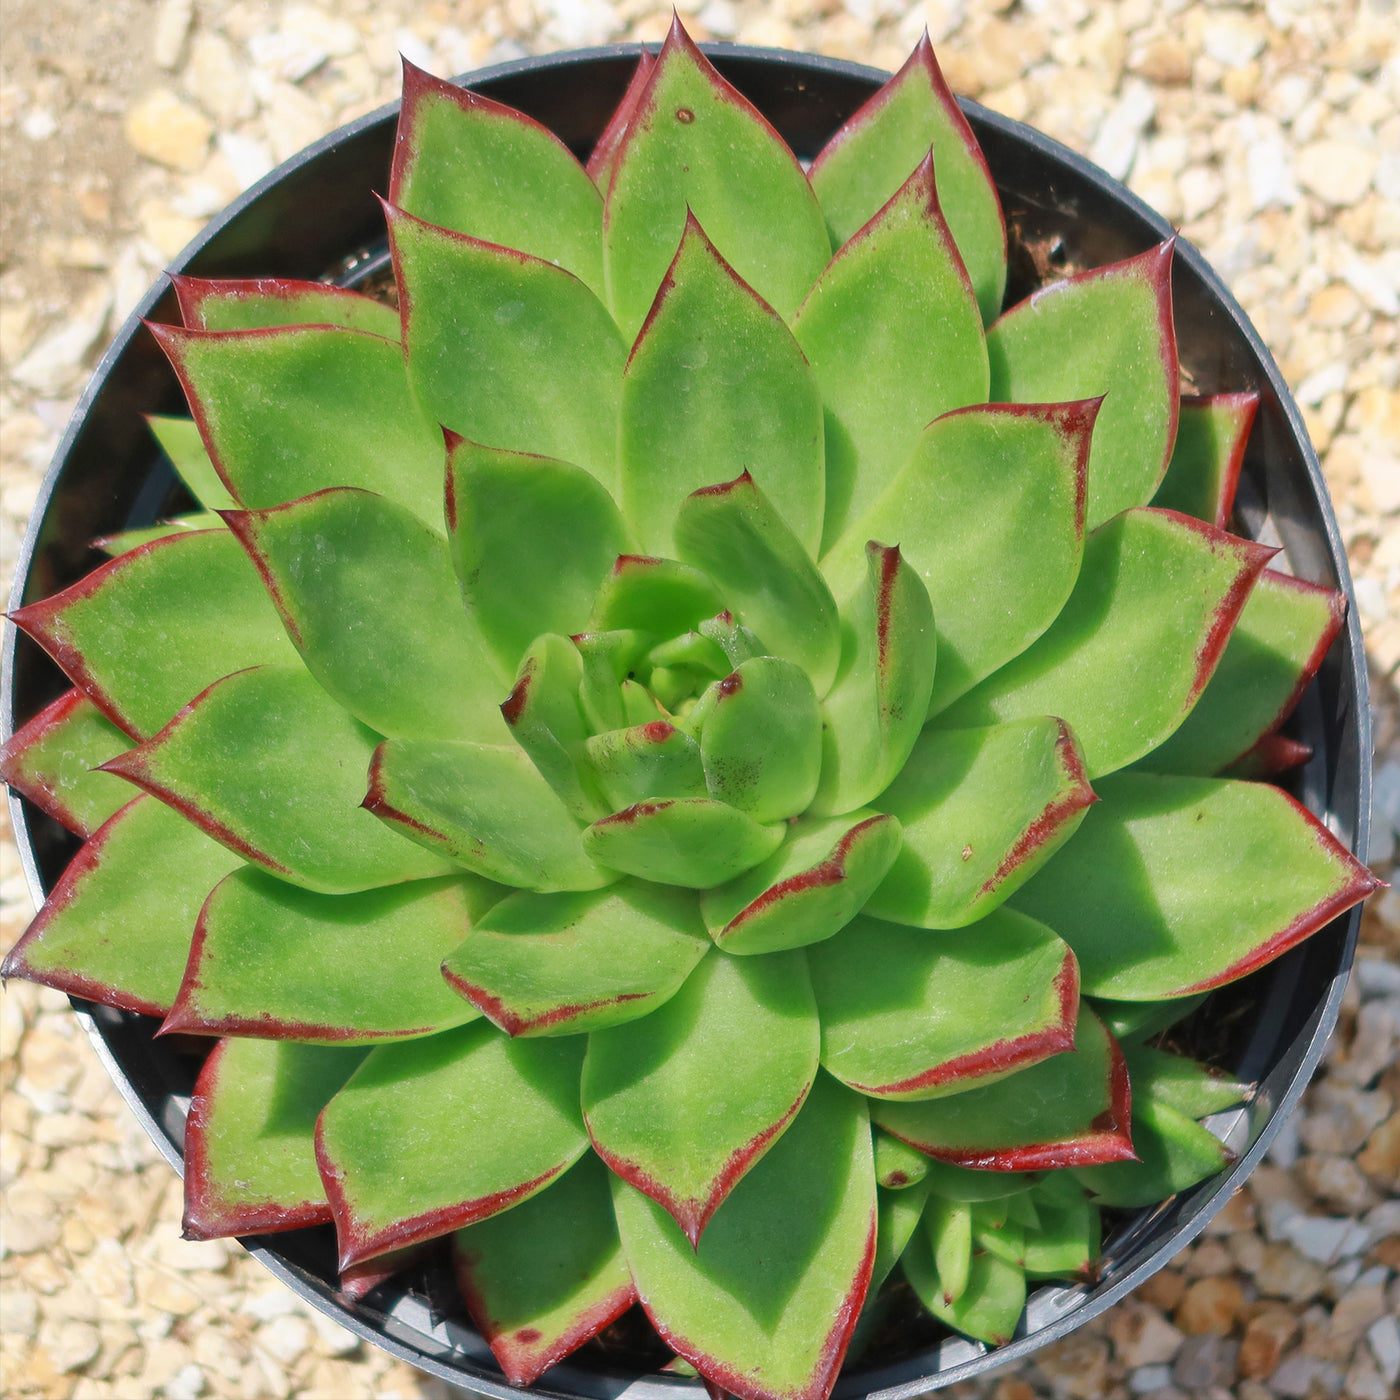 Molded Wax Agave - Echeveria agavoides 'Red Edge'